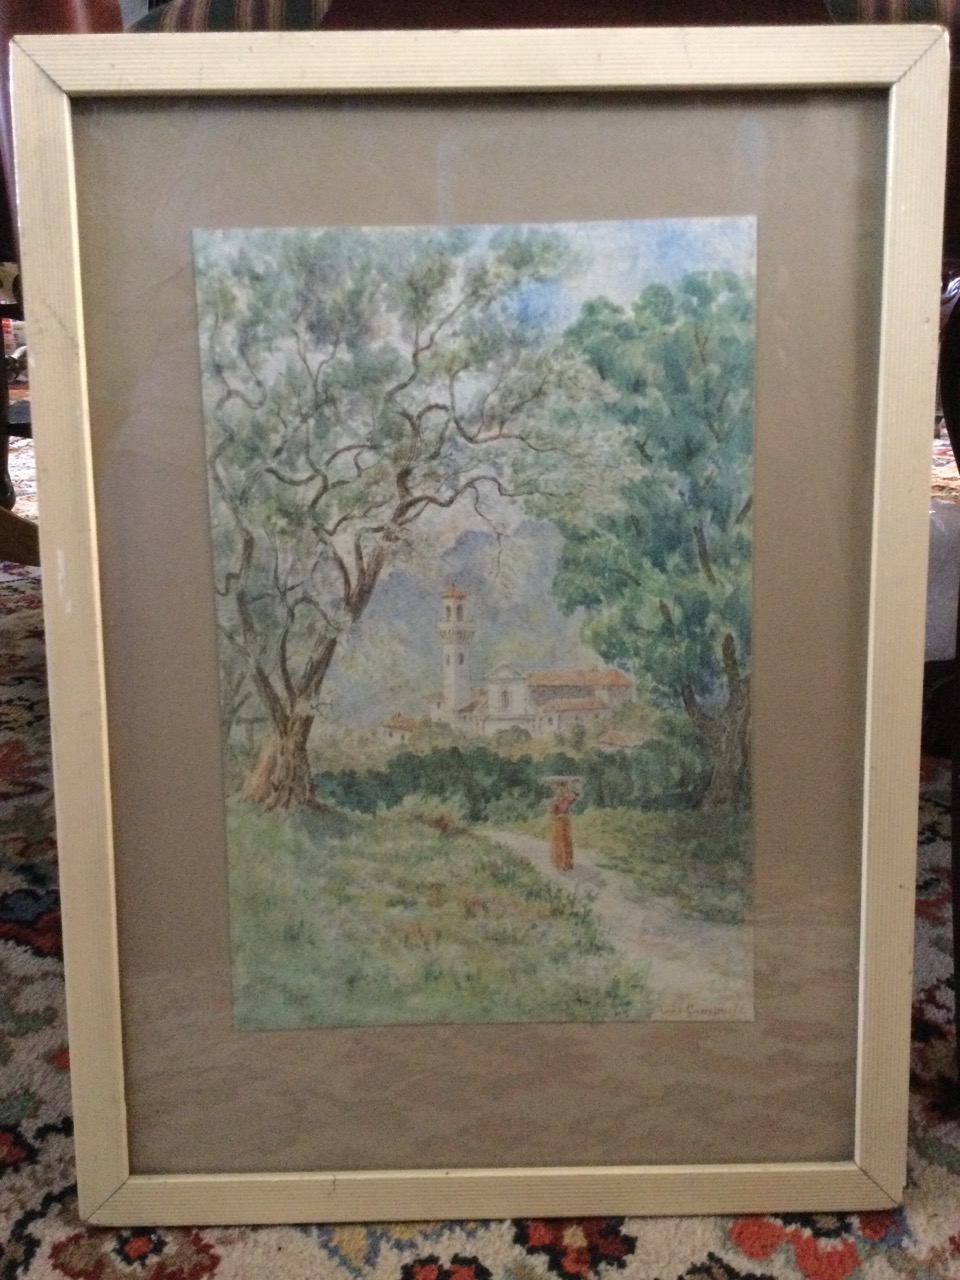 CN Campbell, watercolour, landscape with figure on path, signed, laid down & framed. (7.5in x 11. - Image 2 of 3